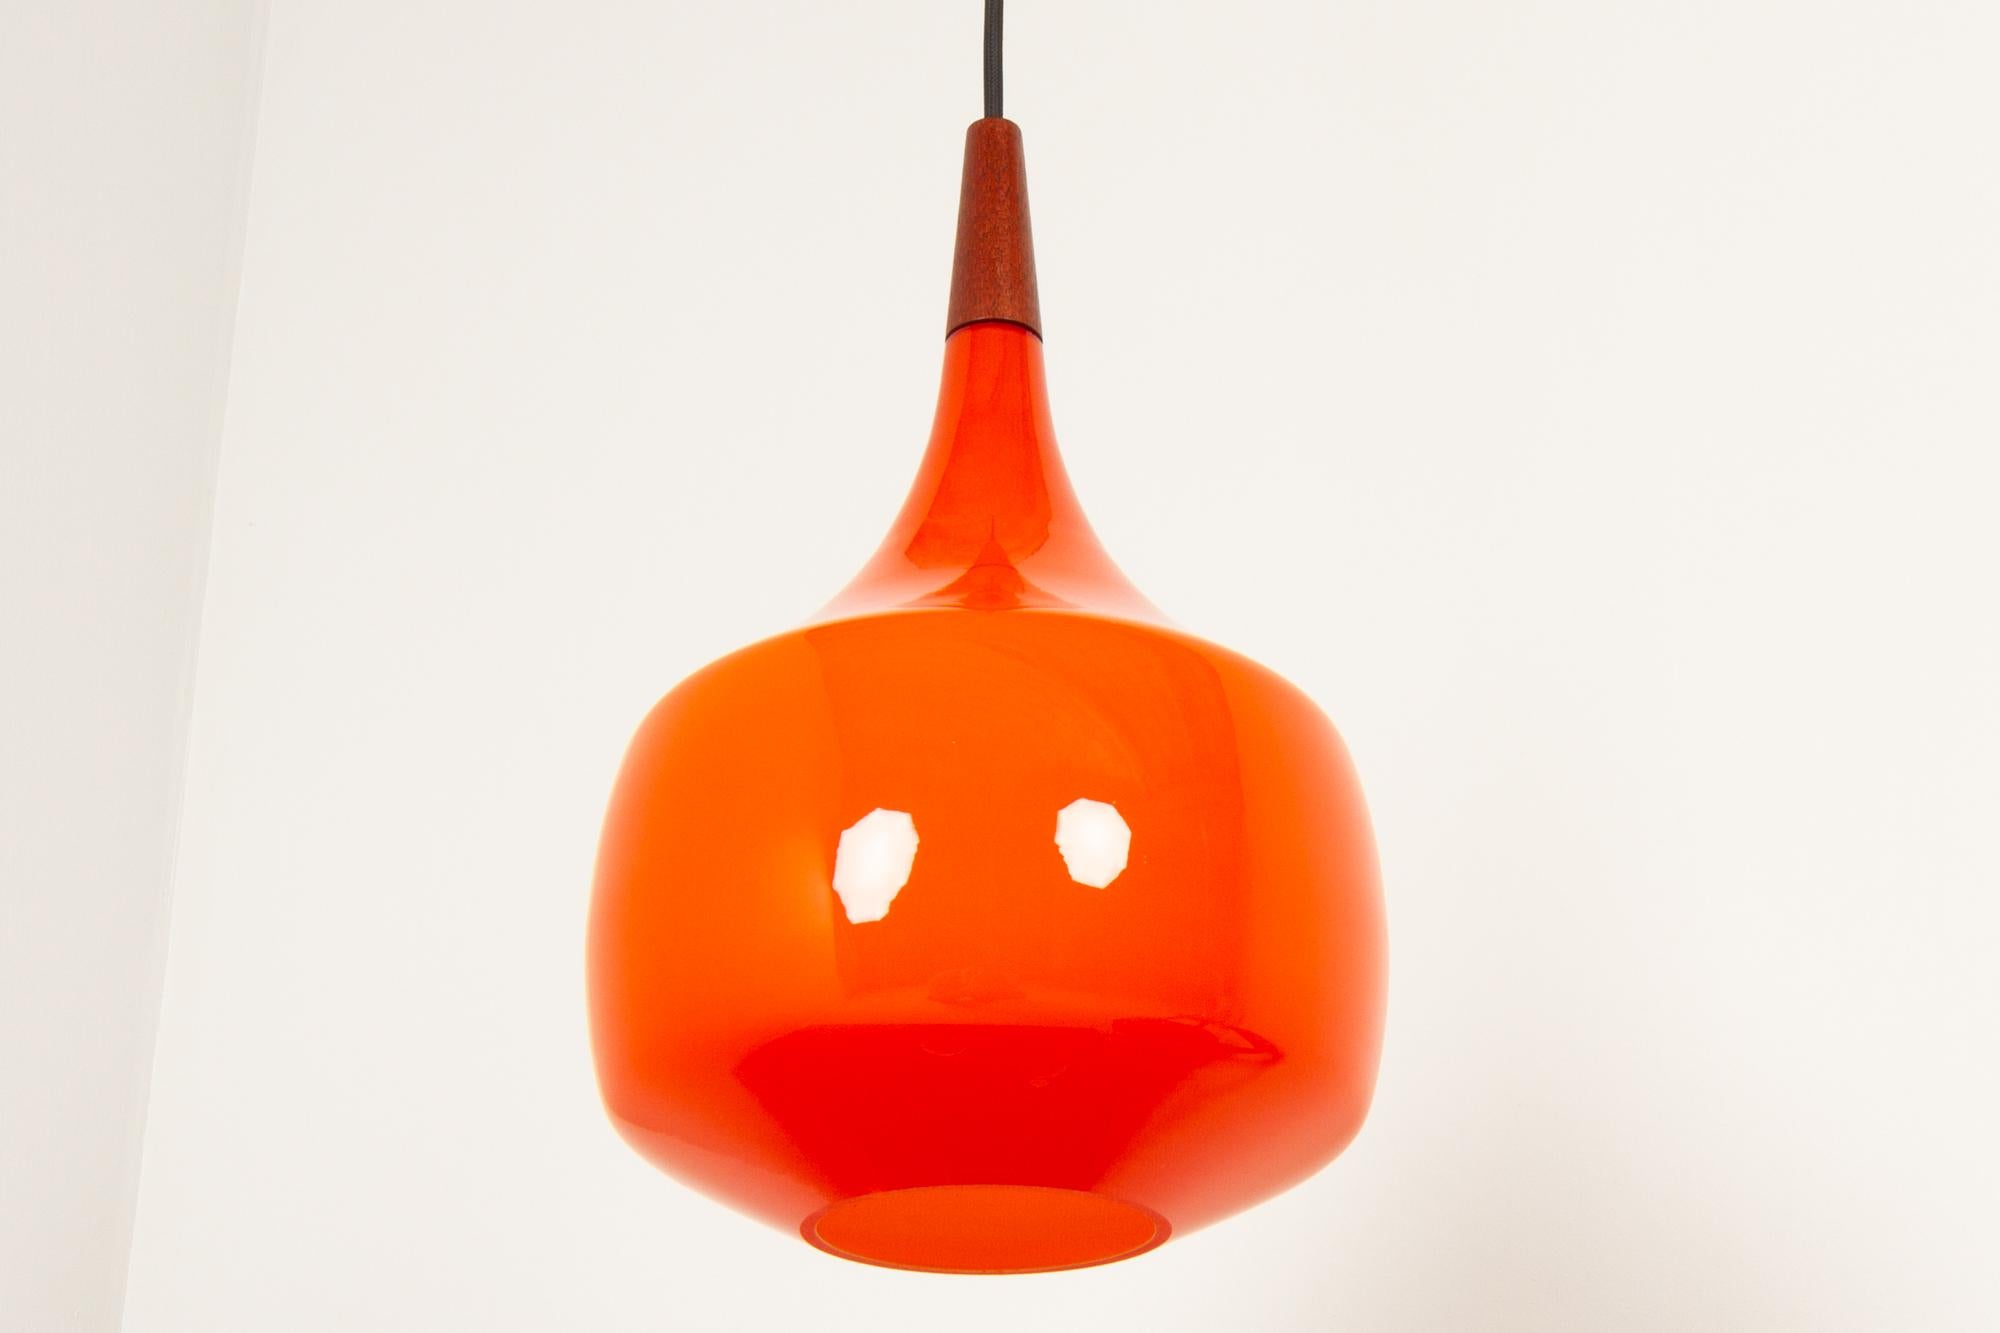 Vintage Danish orange glass pendant by Holmegaard, 1960s.
Danish modern ceiling lamp in opaline glass made by Danish glass works Holmegaard. This is the rare version in a warm and vivid orange color with a top in solid teak.
Marked 